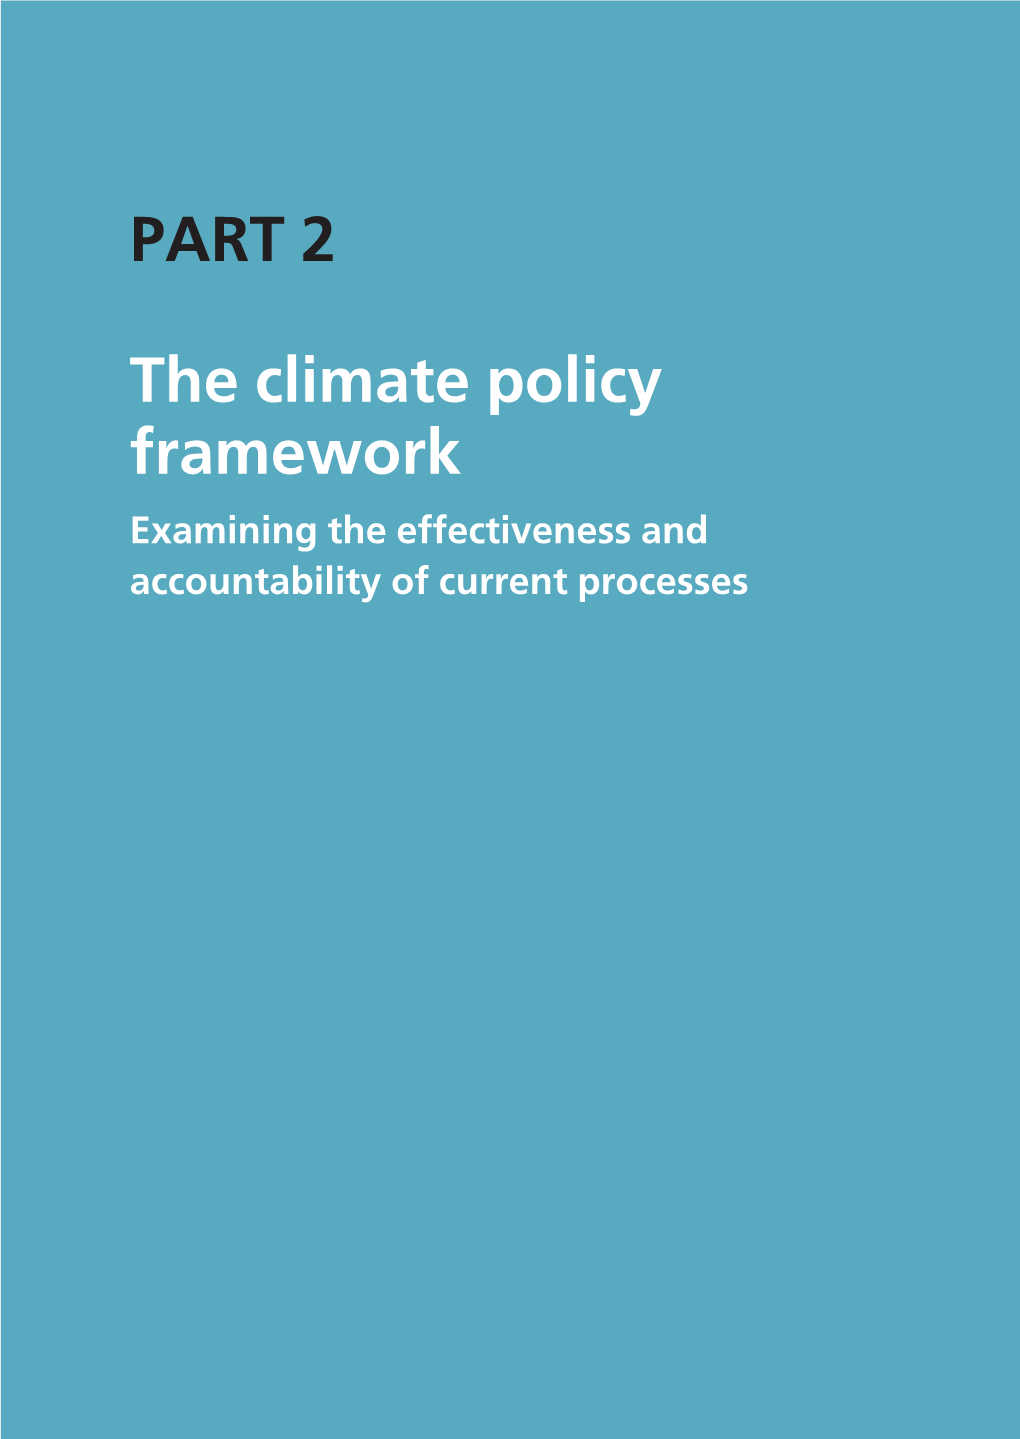 PART 2 the Climate Policy Framework